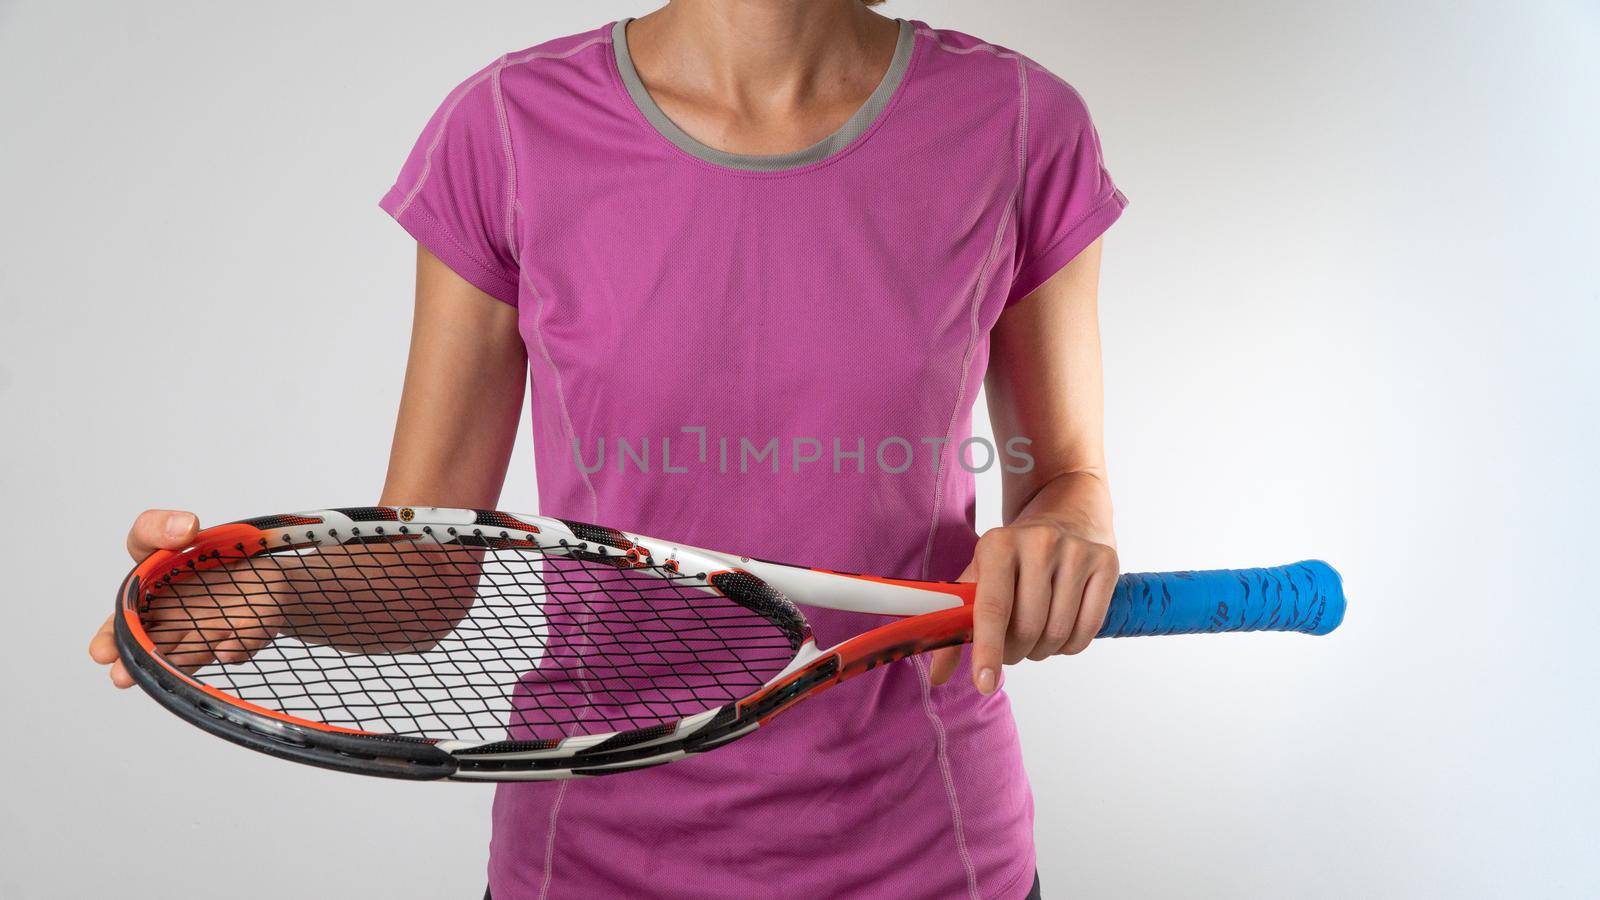 Woman with tennis racket on white background by voktybre